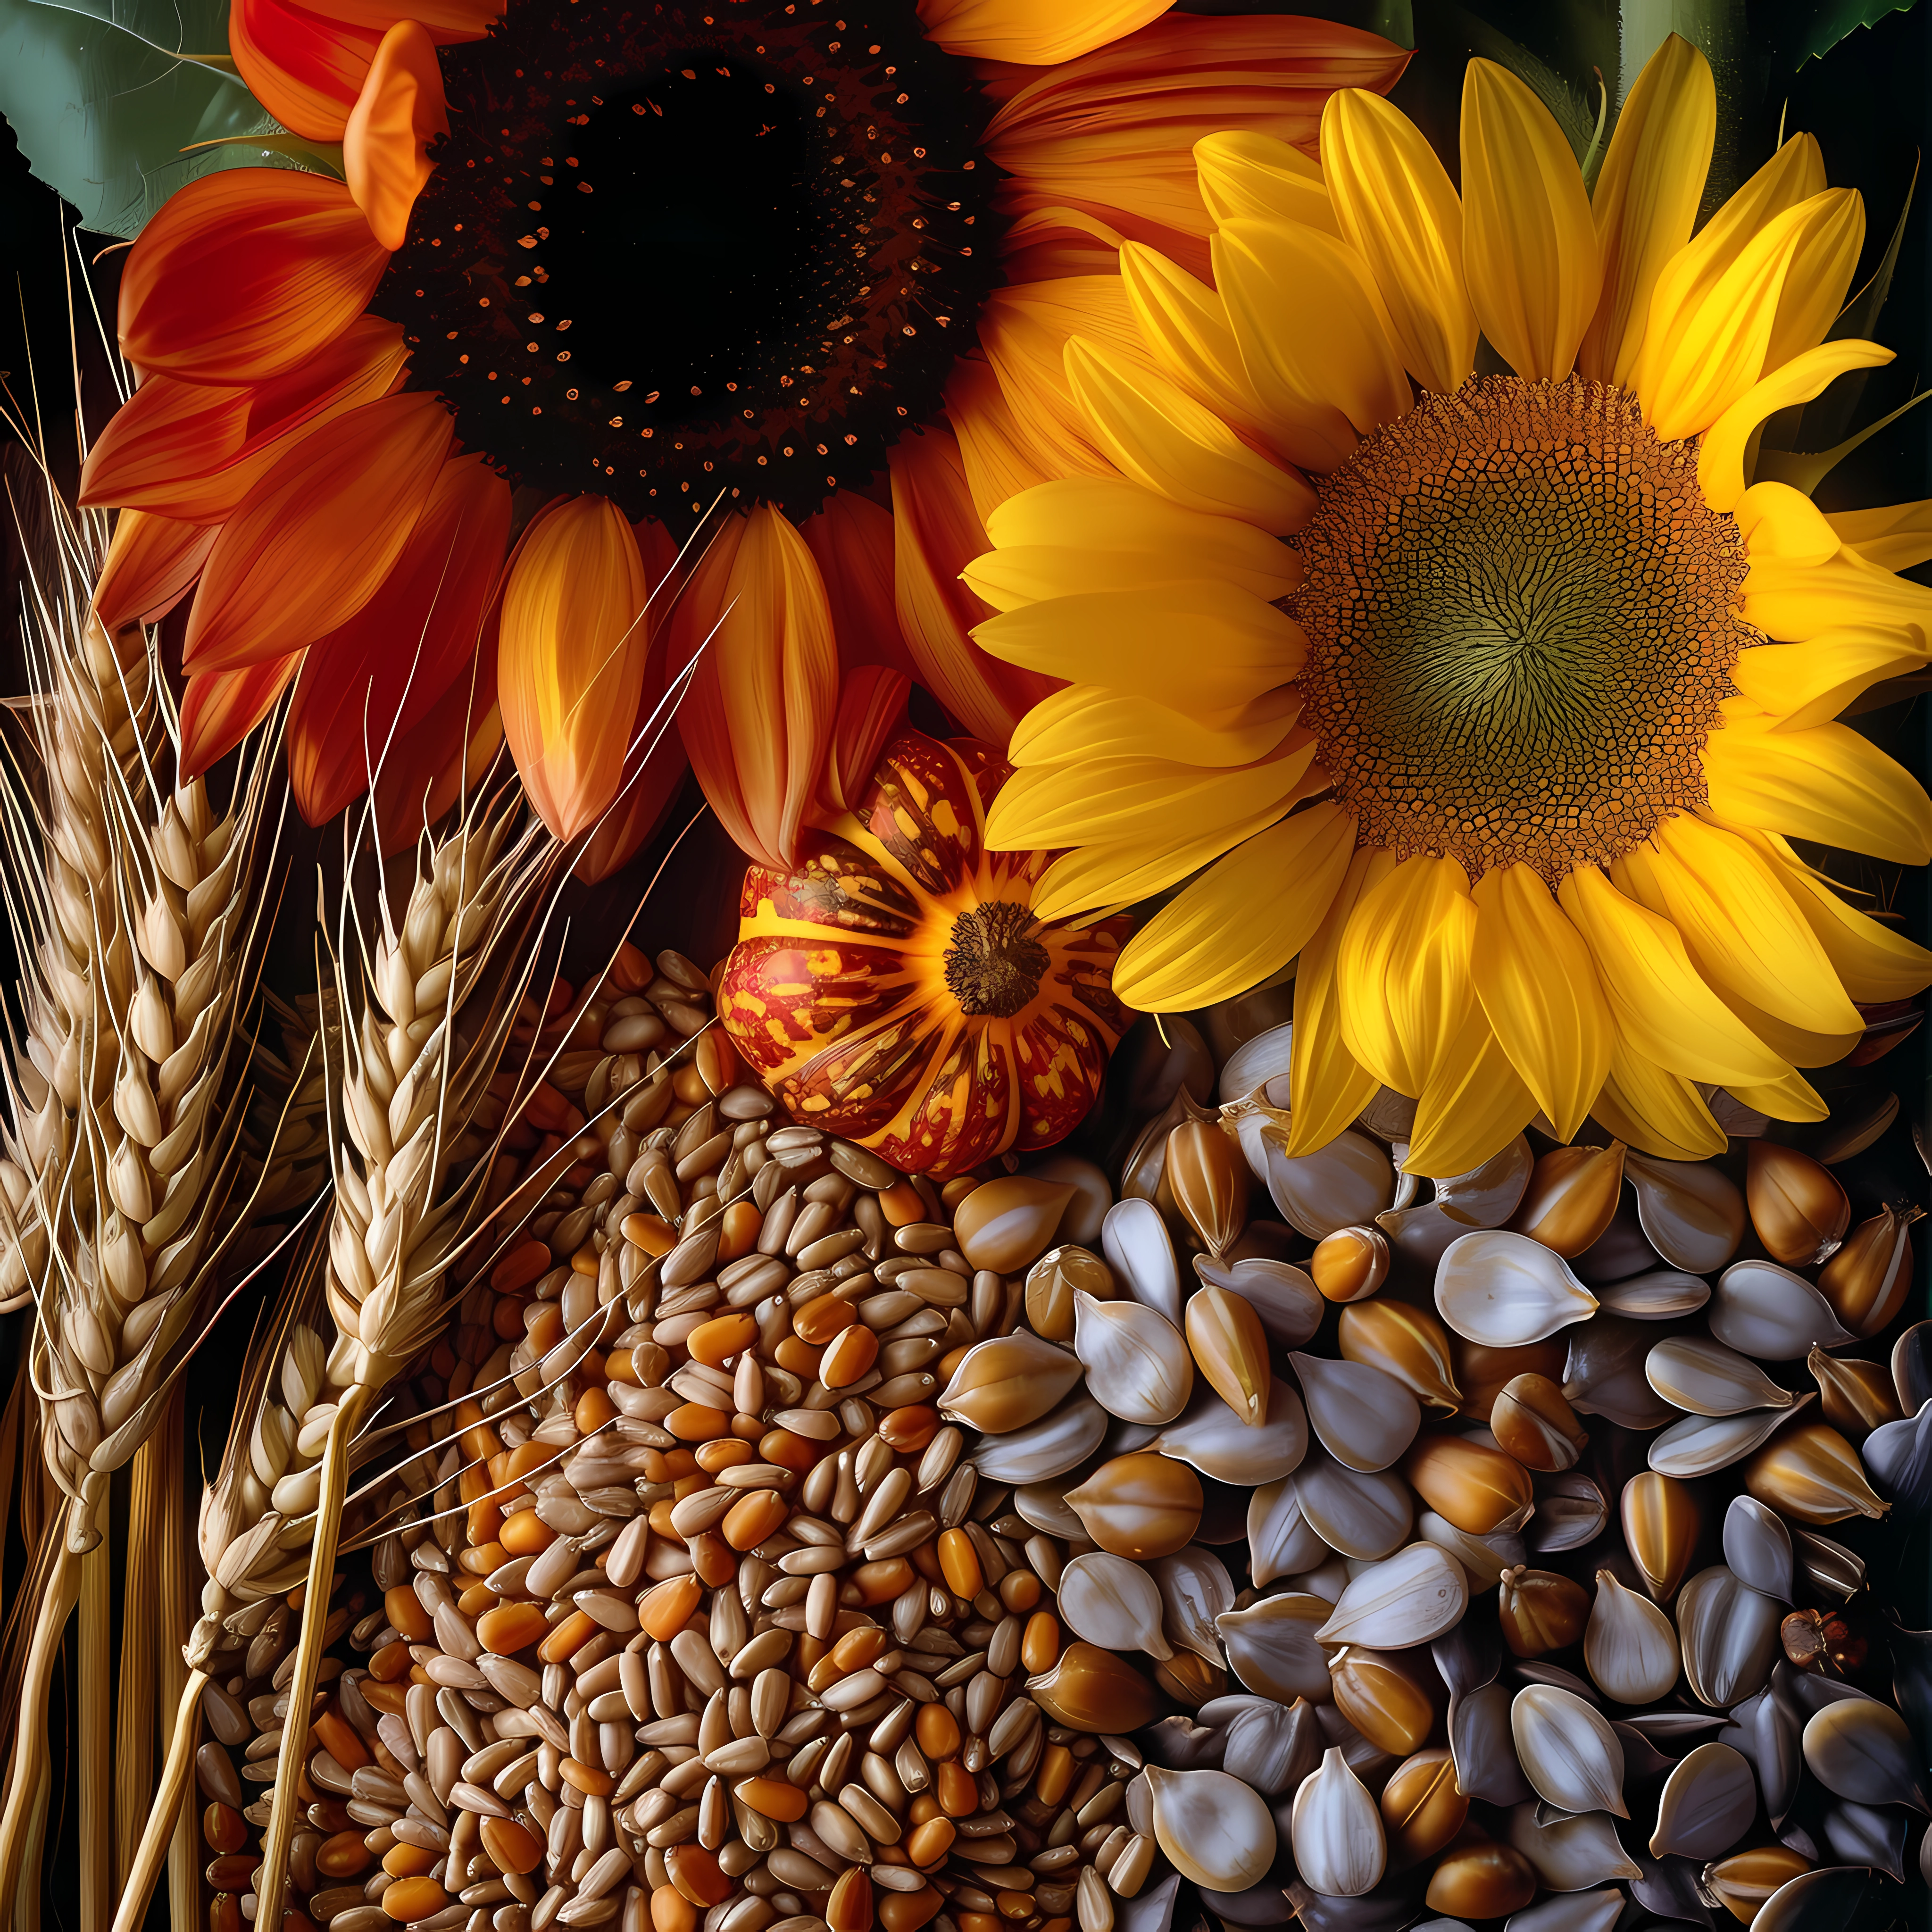 Colorful still life avatar featuring bright sunflowers, pumpkin, assorted seeds, and wheat stalks.